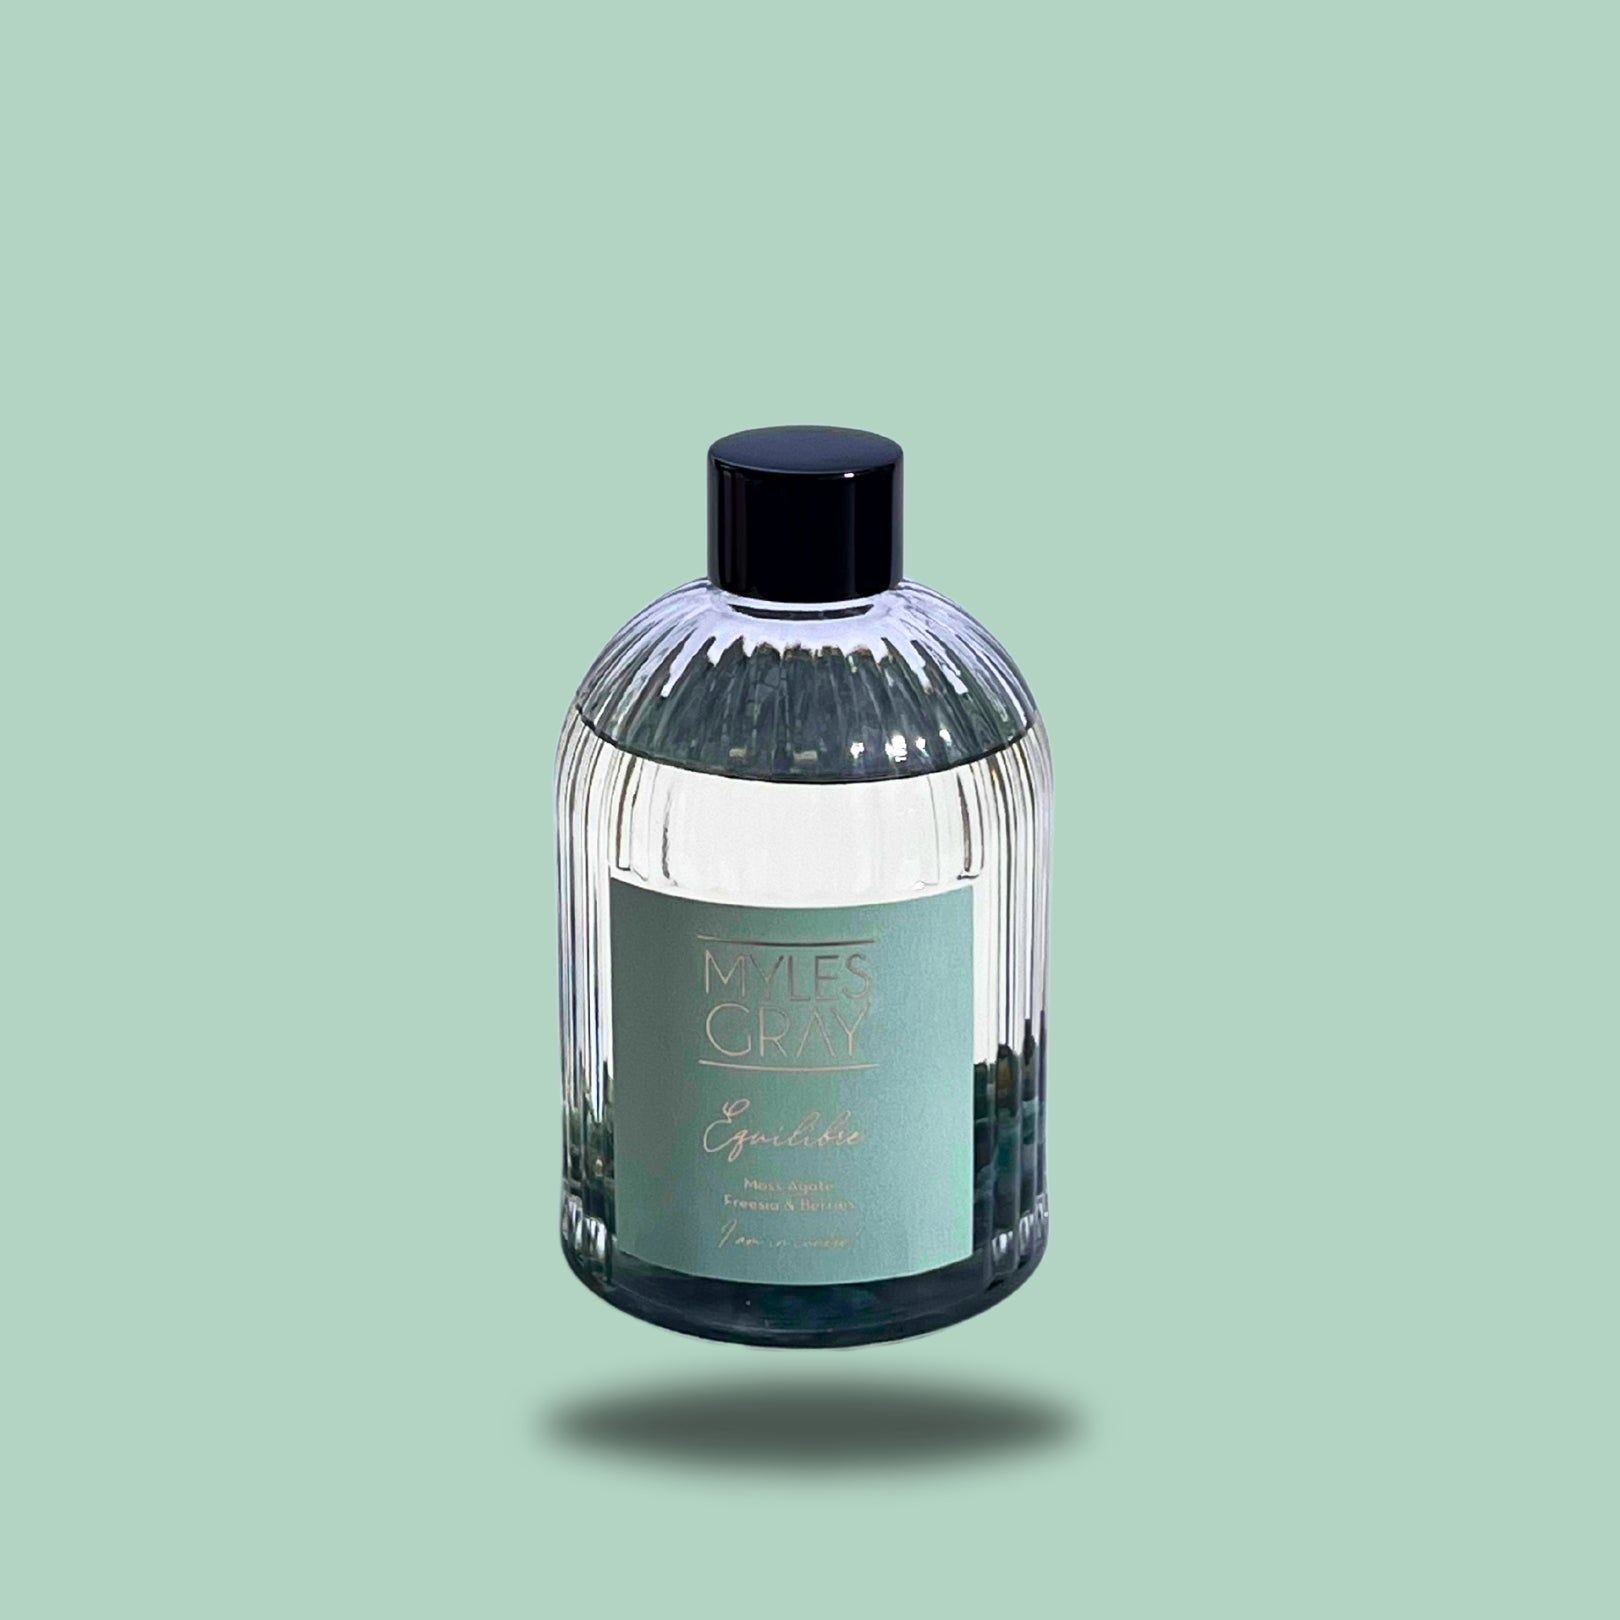 Equilibre | The Diffuser of Balance 250ml - Myles Gray